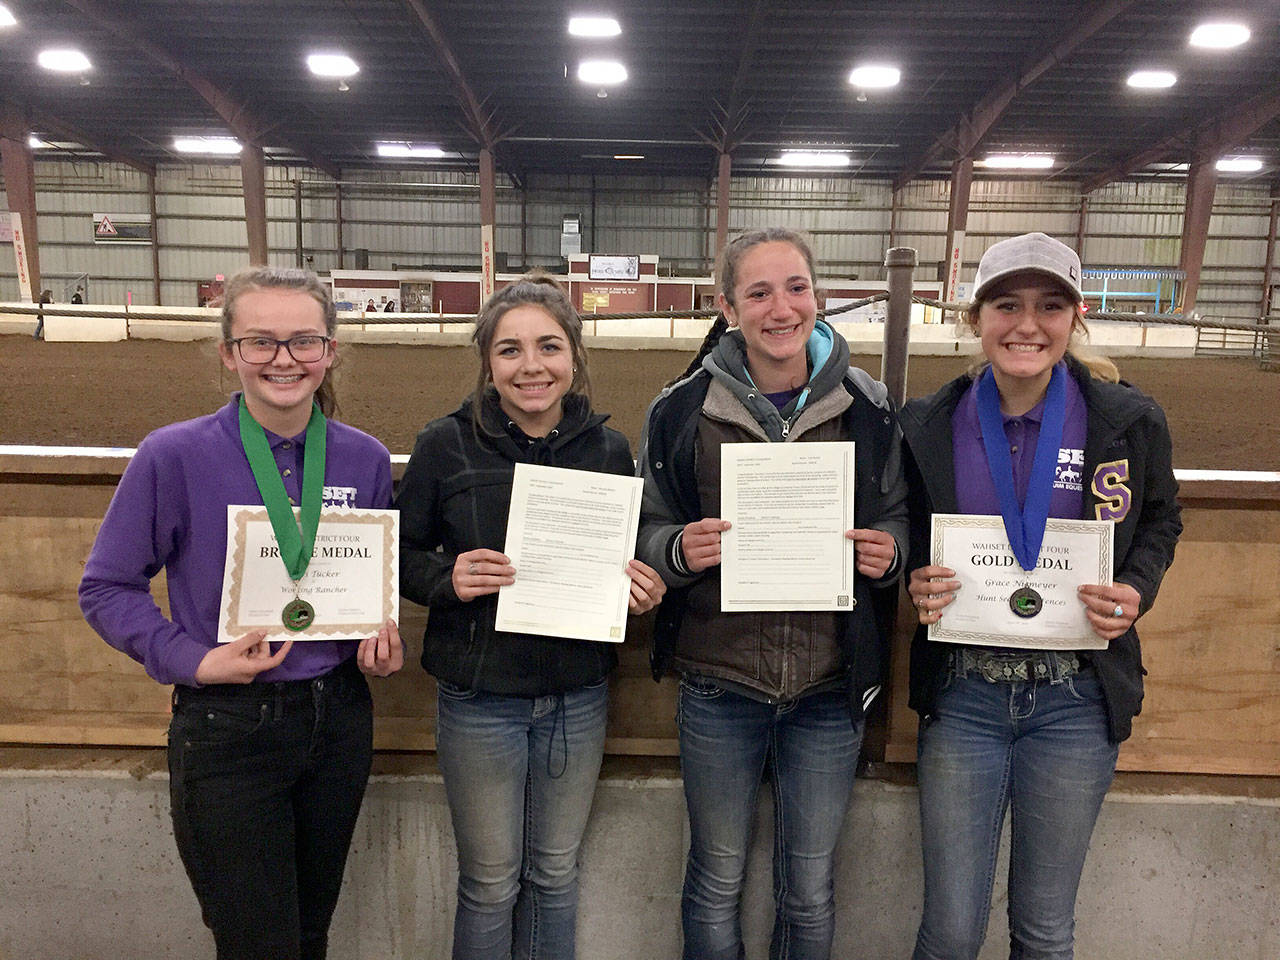 Pictured, from left, are: Keri Tucker, with her third-place bronze medal in Working Rancher; Miranda Williams and Yana Hoesel, with District 4 scholarship awards, and Grace Niemeyer, with her gold medal in Jumping. Submitted photo